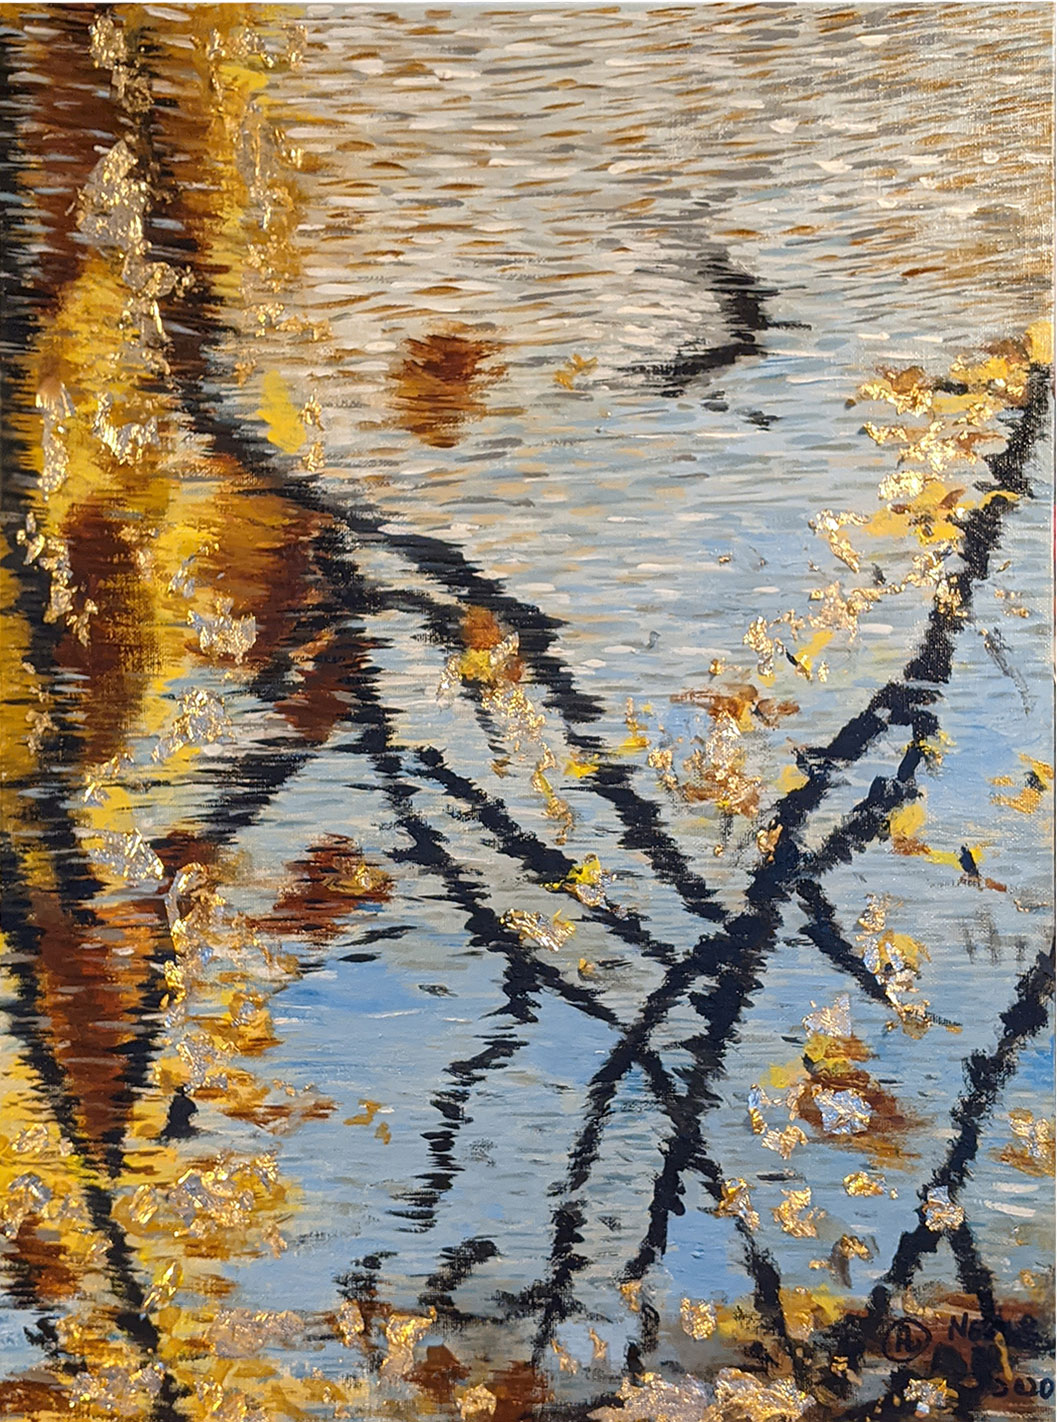 Reflection of the Fall Gold leaf sheets, oil painting by Fan Stanbrough